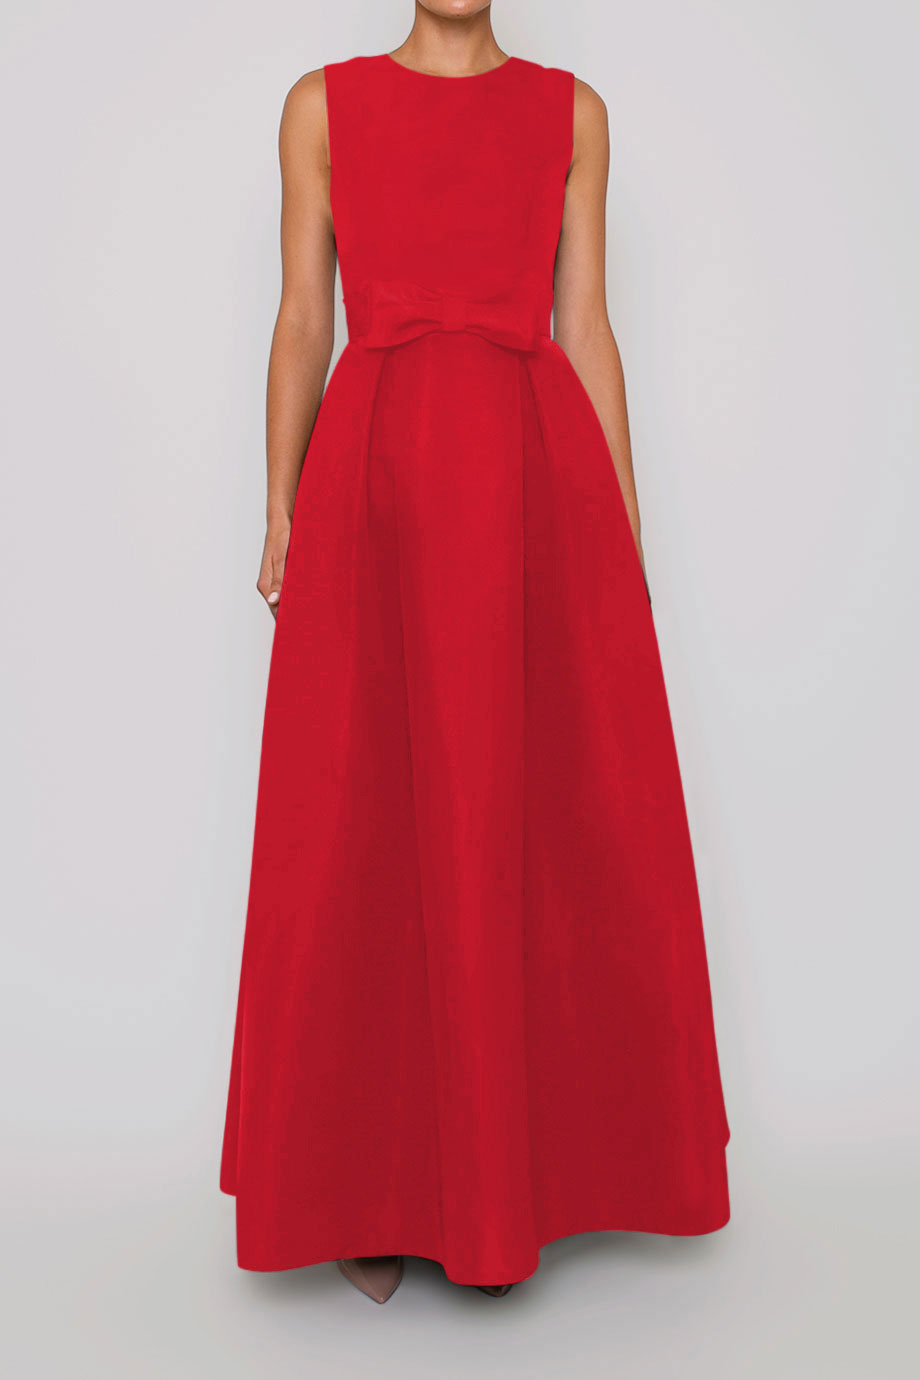 Buy Incredible Red Georgette Solid Partywear Dresses - Inddus.in.